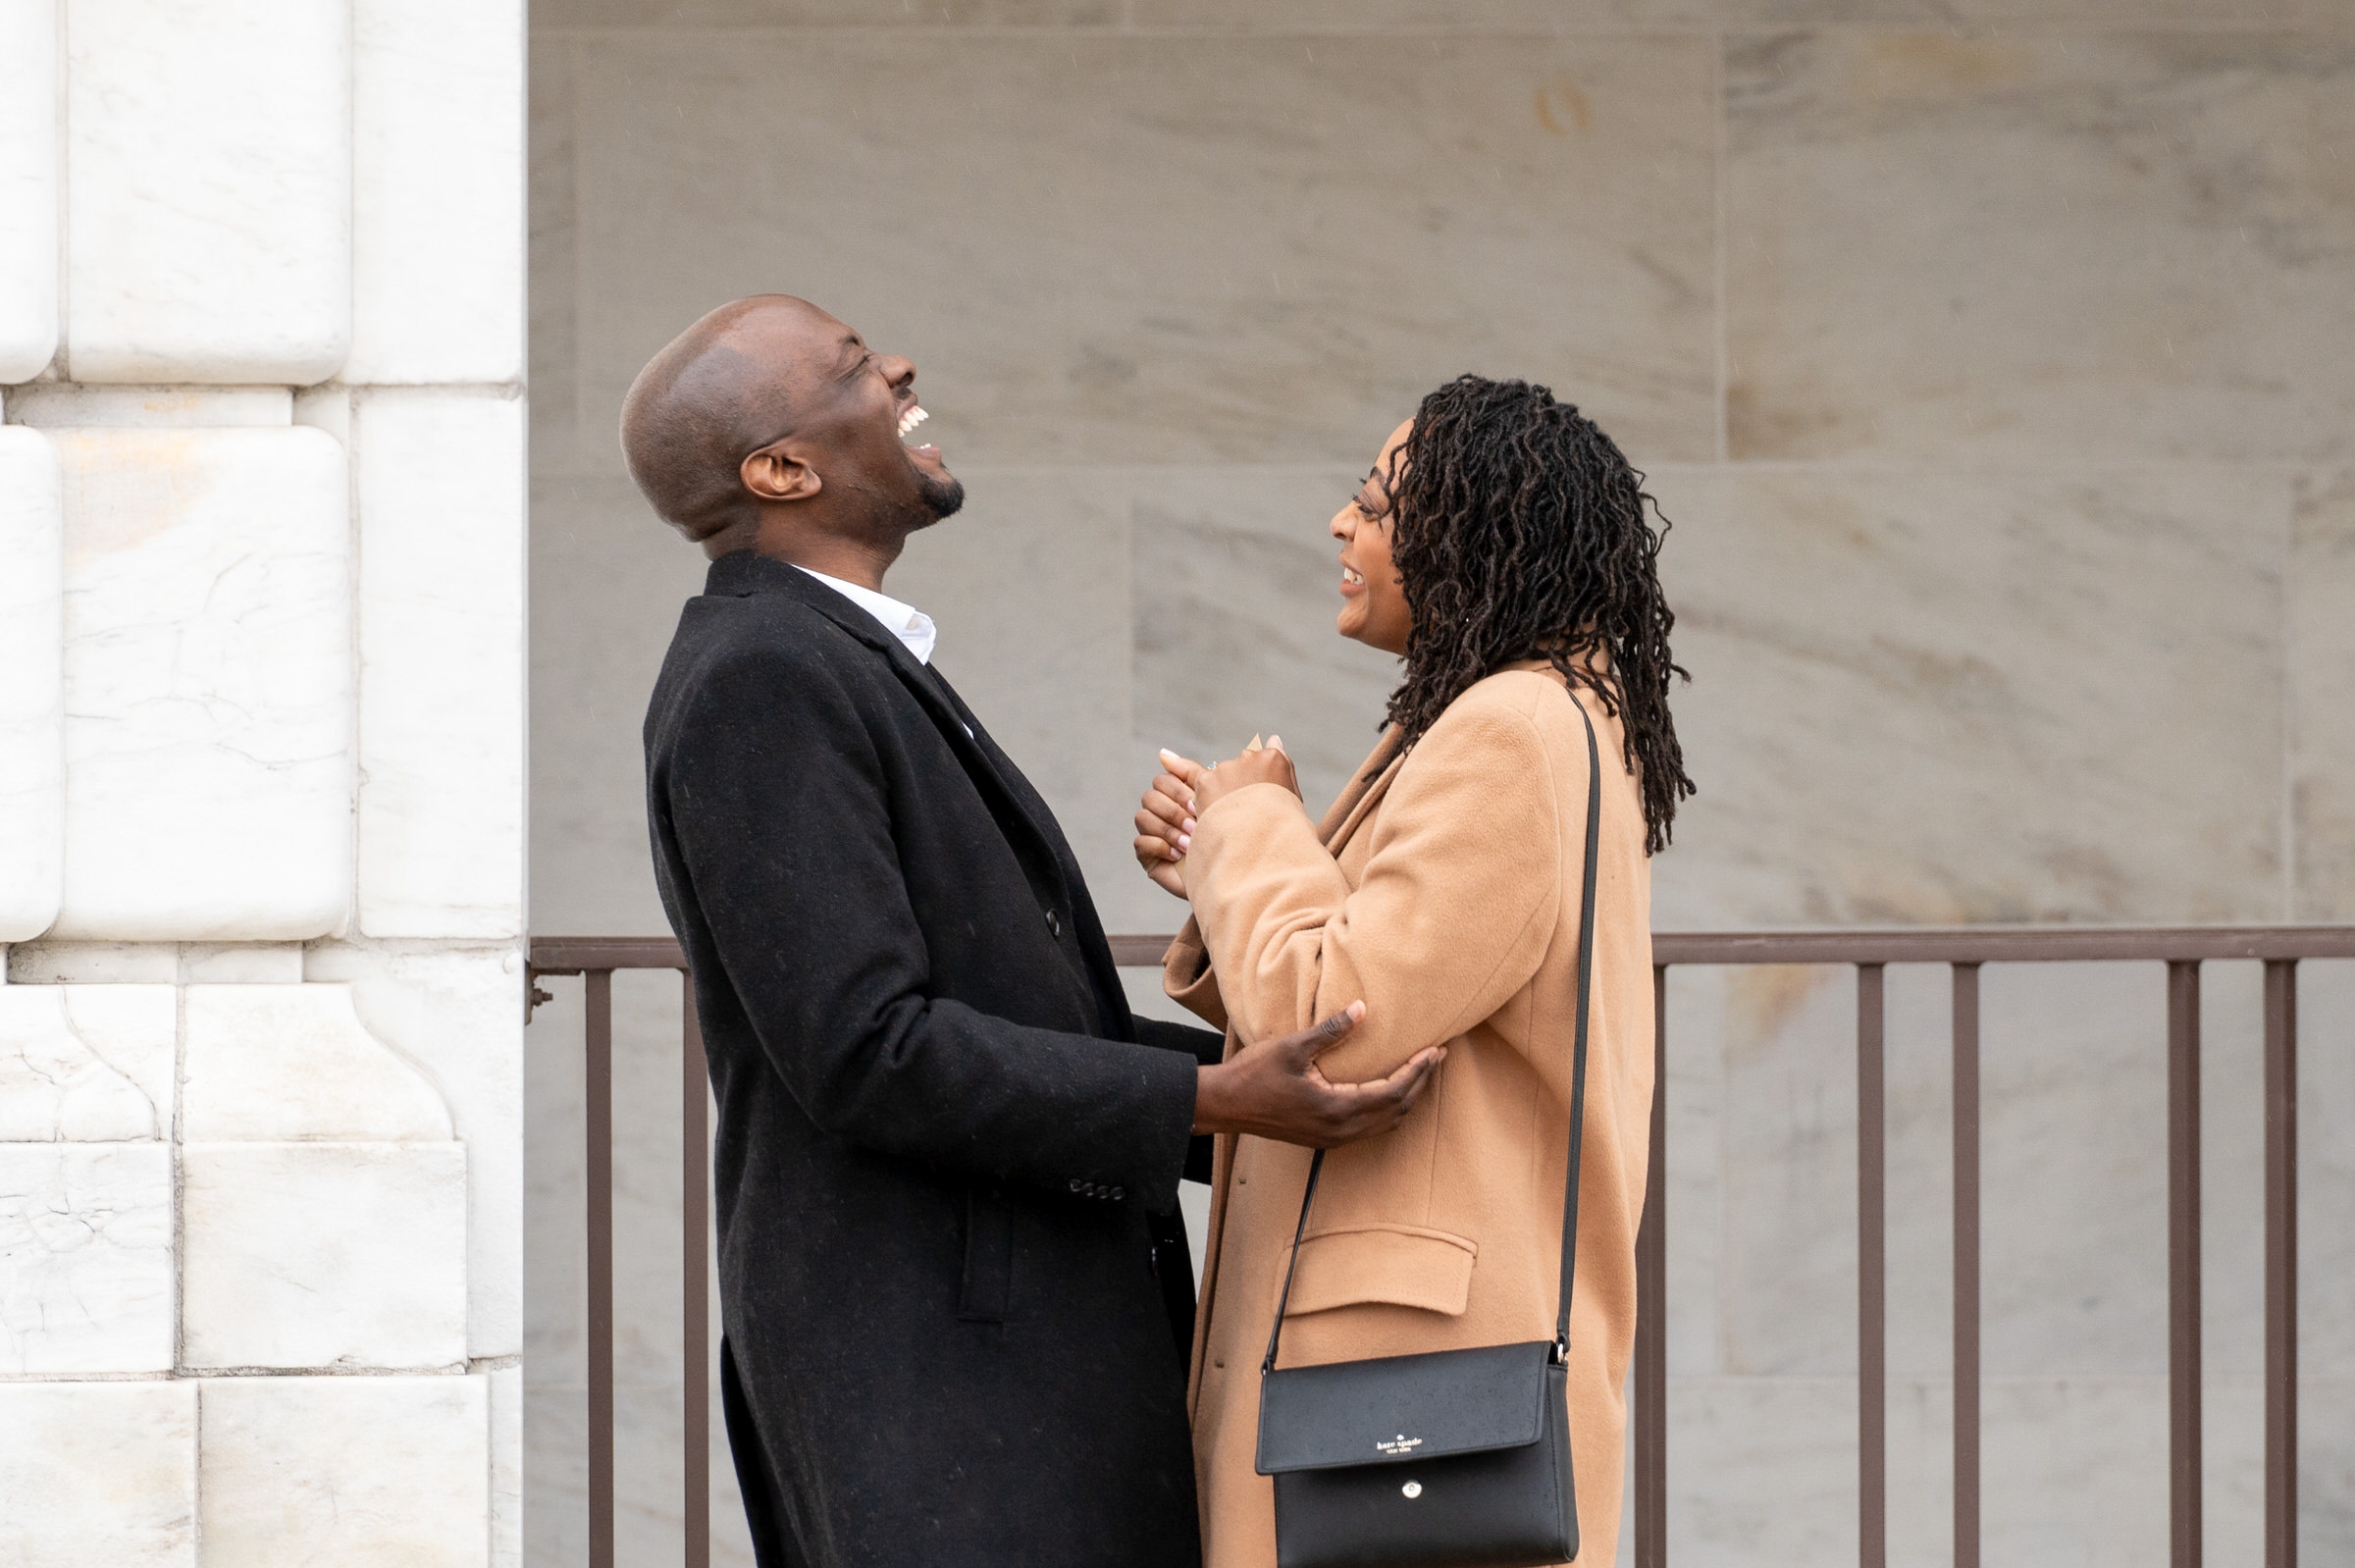 A couple reacts with joy and laughter during a marriage proposal at the DIA.  